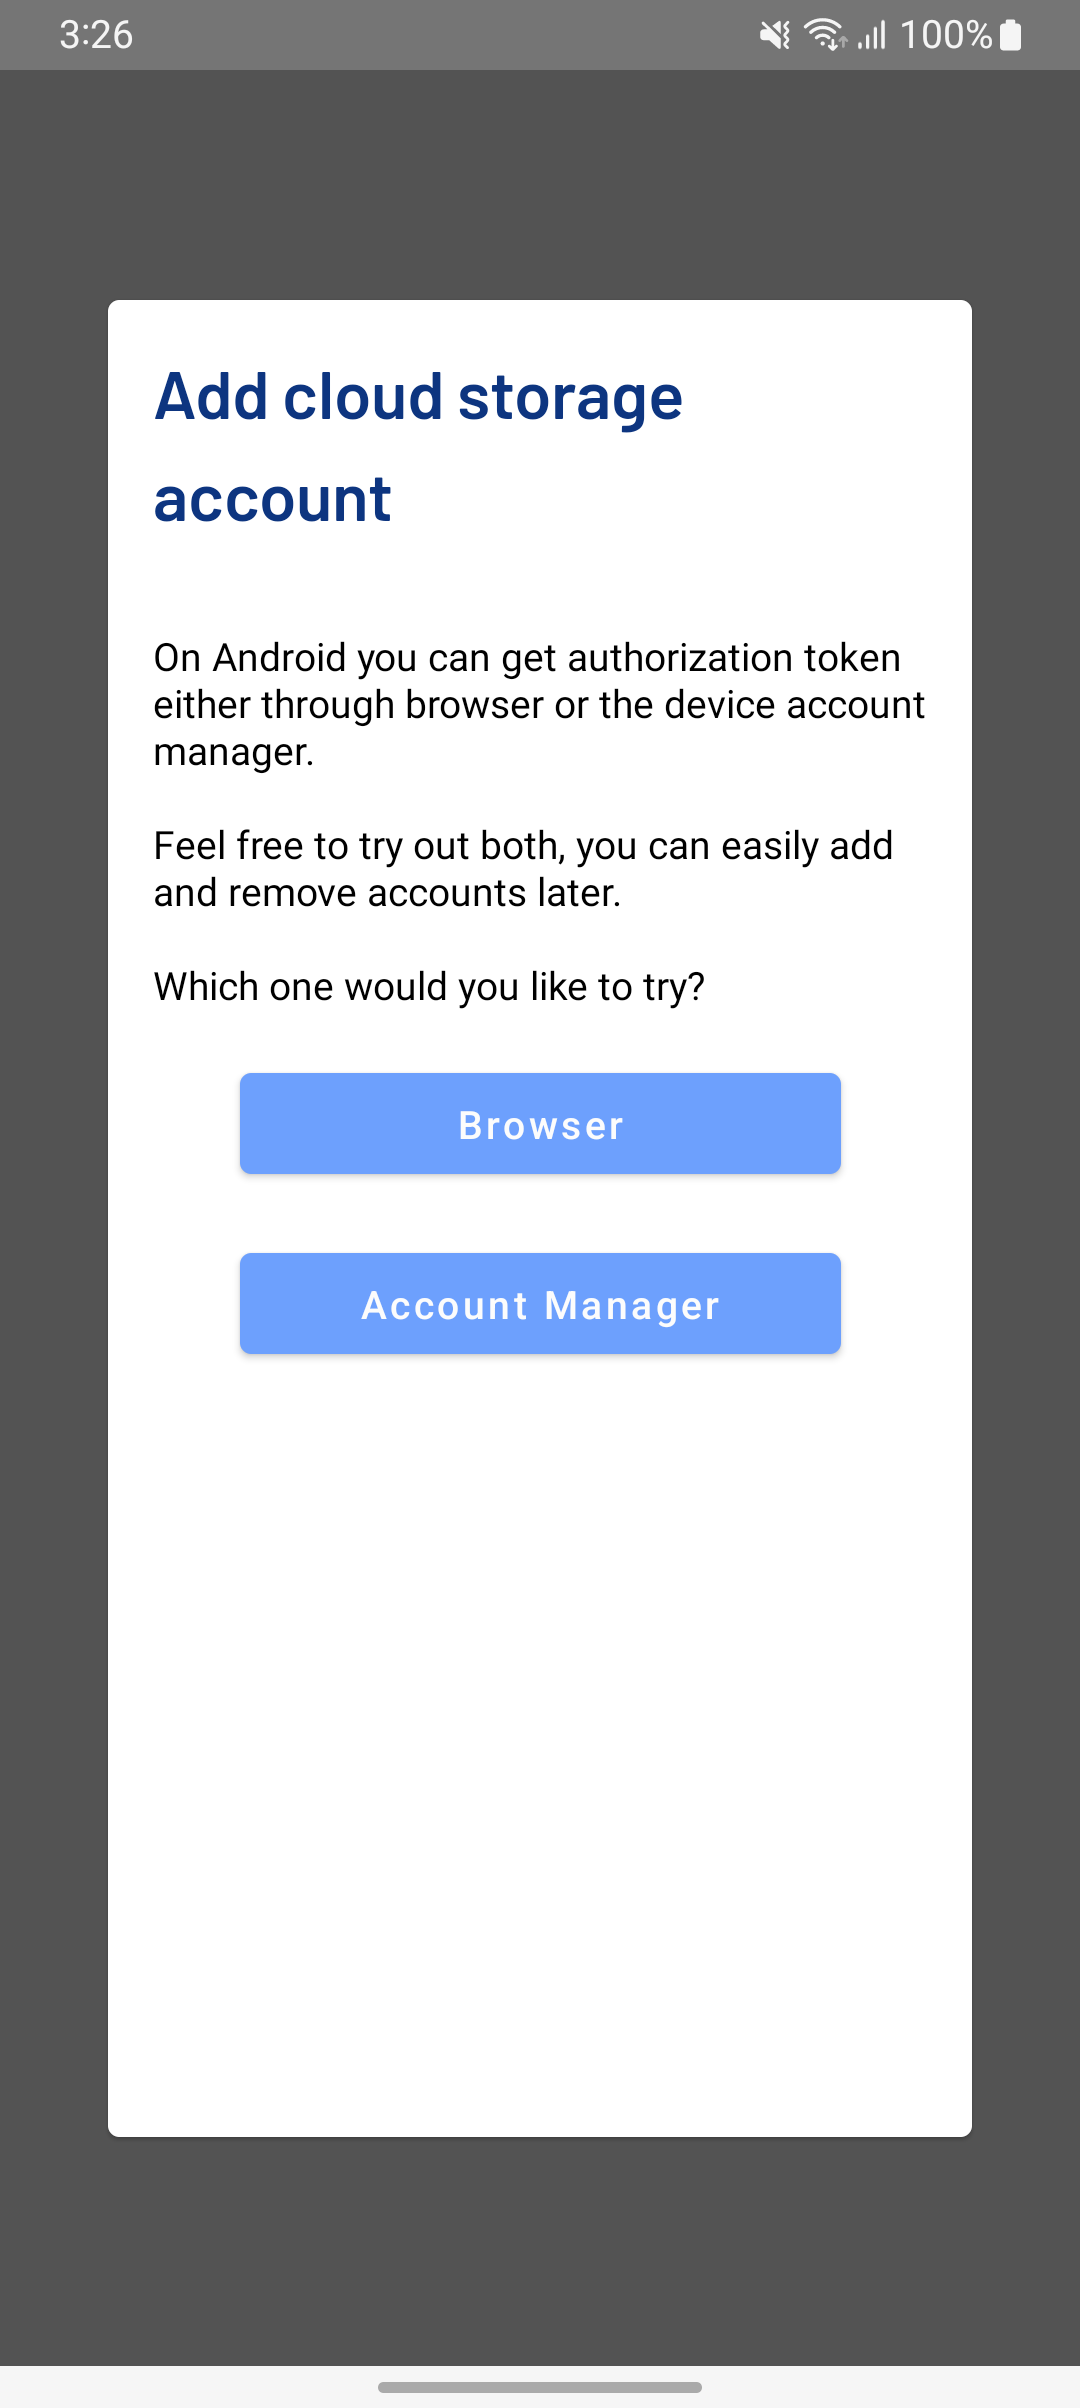 Screenshot of a dialog asking for preferred method of adding OneDrive account: browser or account manager